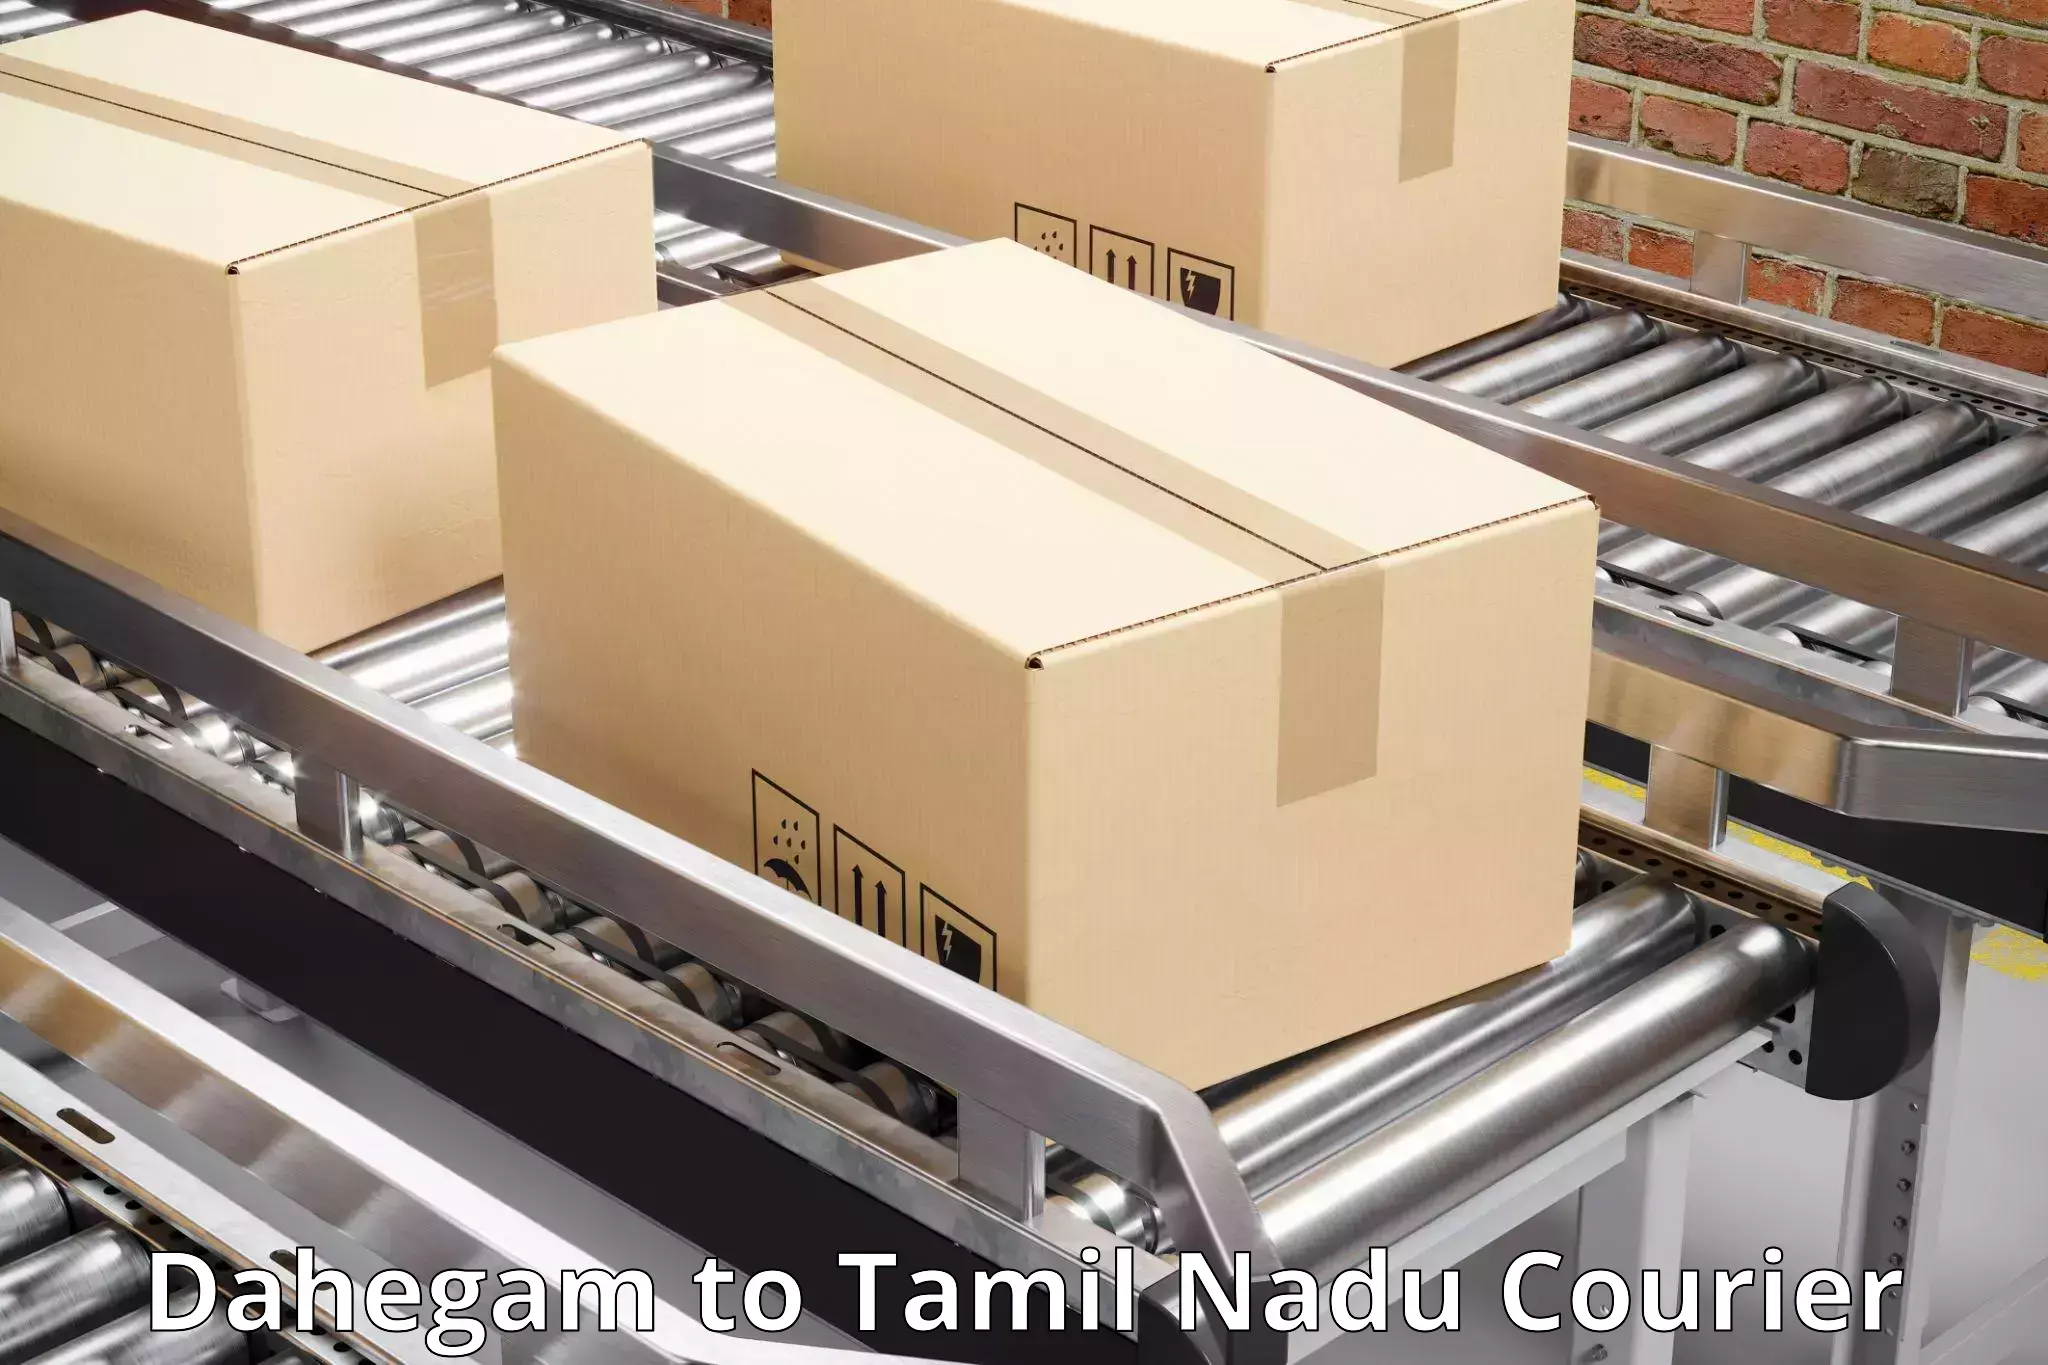 Multi-national courier services Dahegam to Ennore Port Chennai